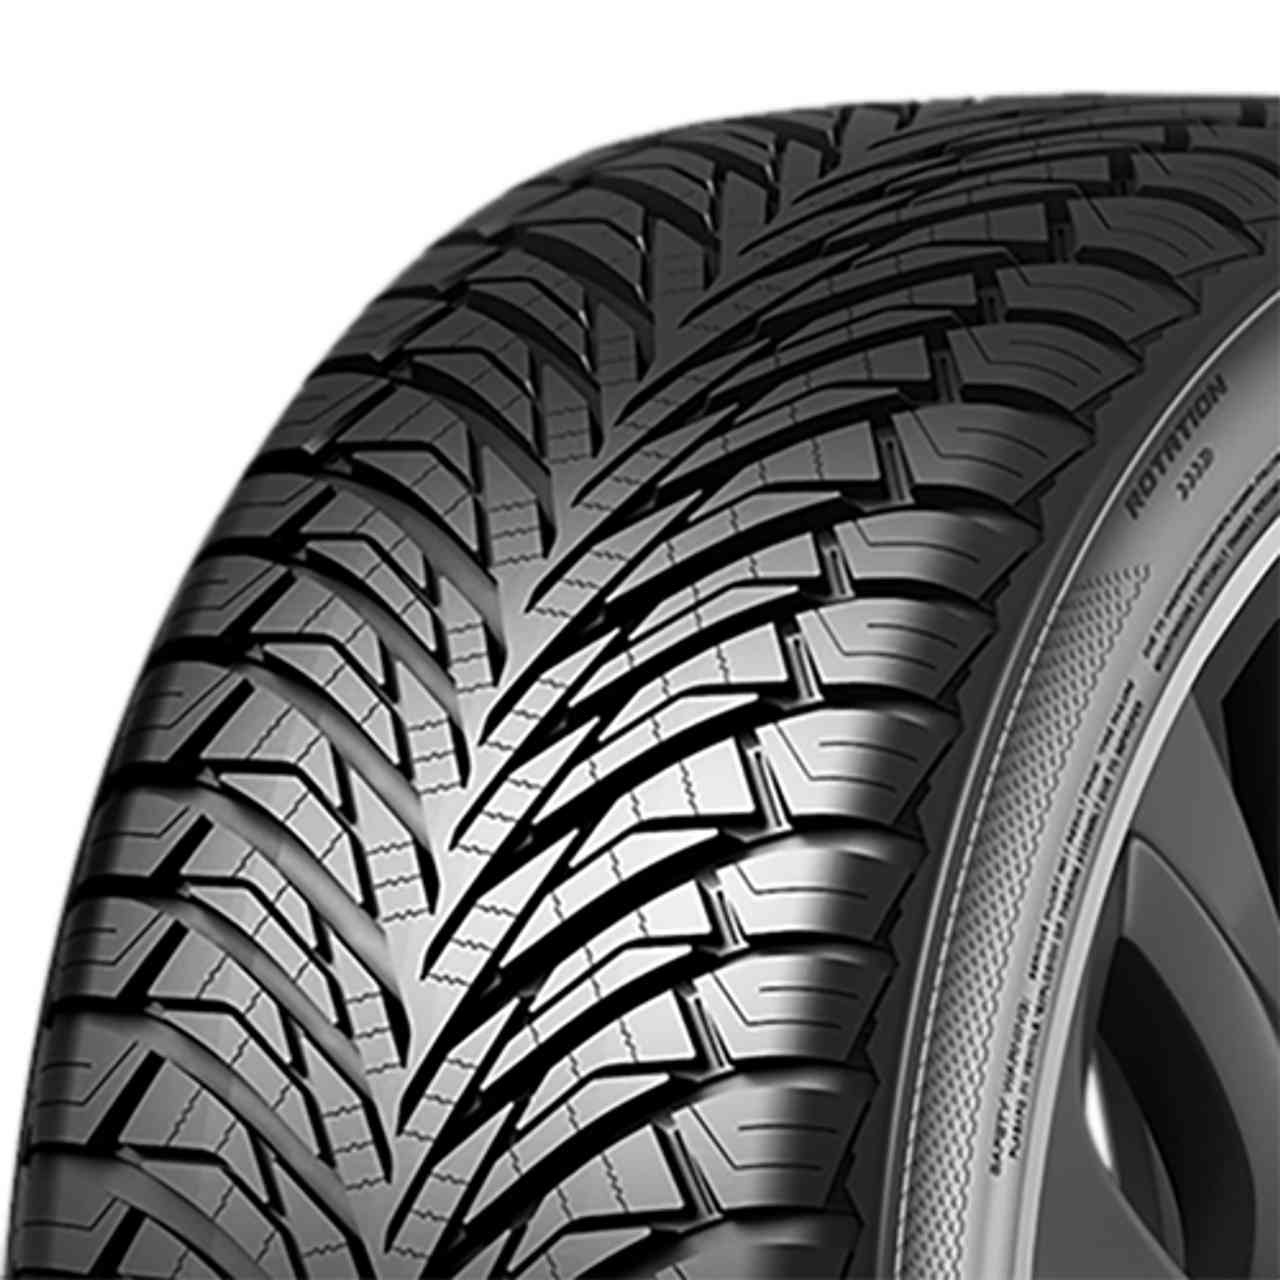 AUSTONE FIXCLIME SP-401 205/60R16 96V BSW